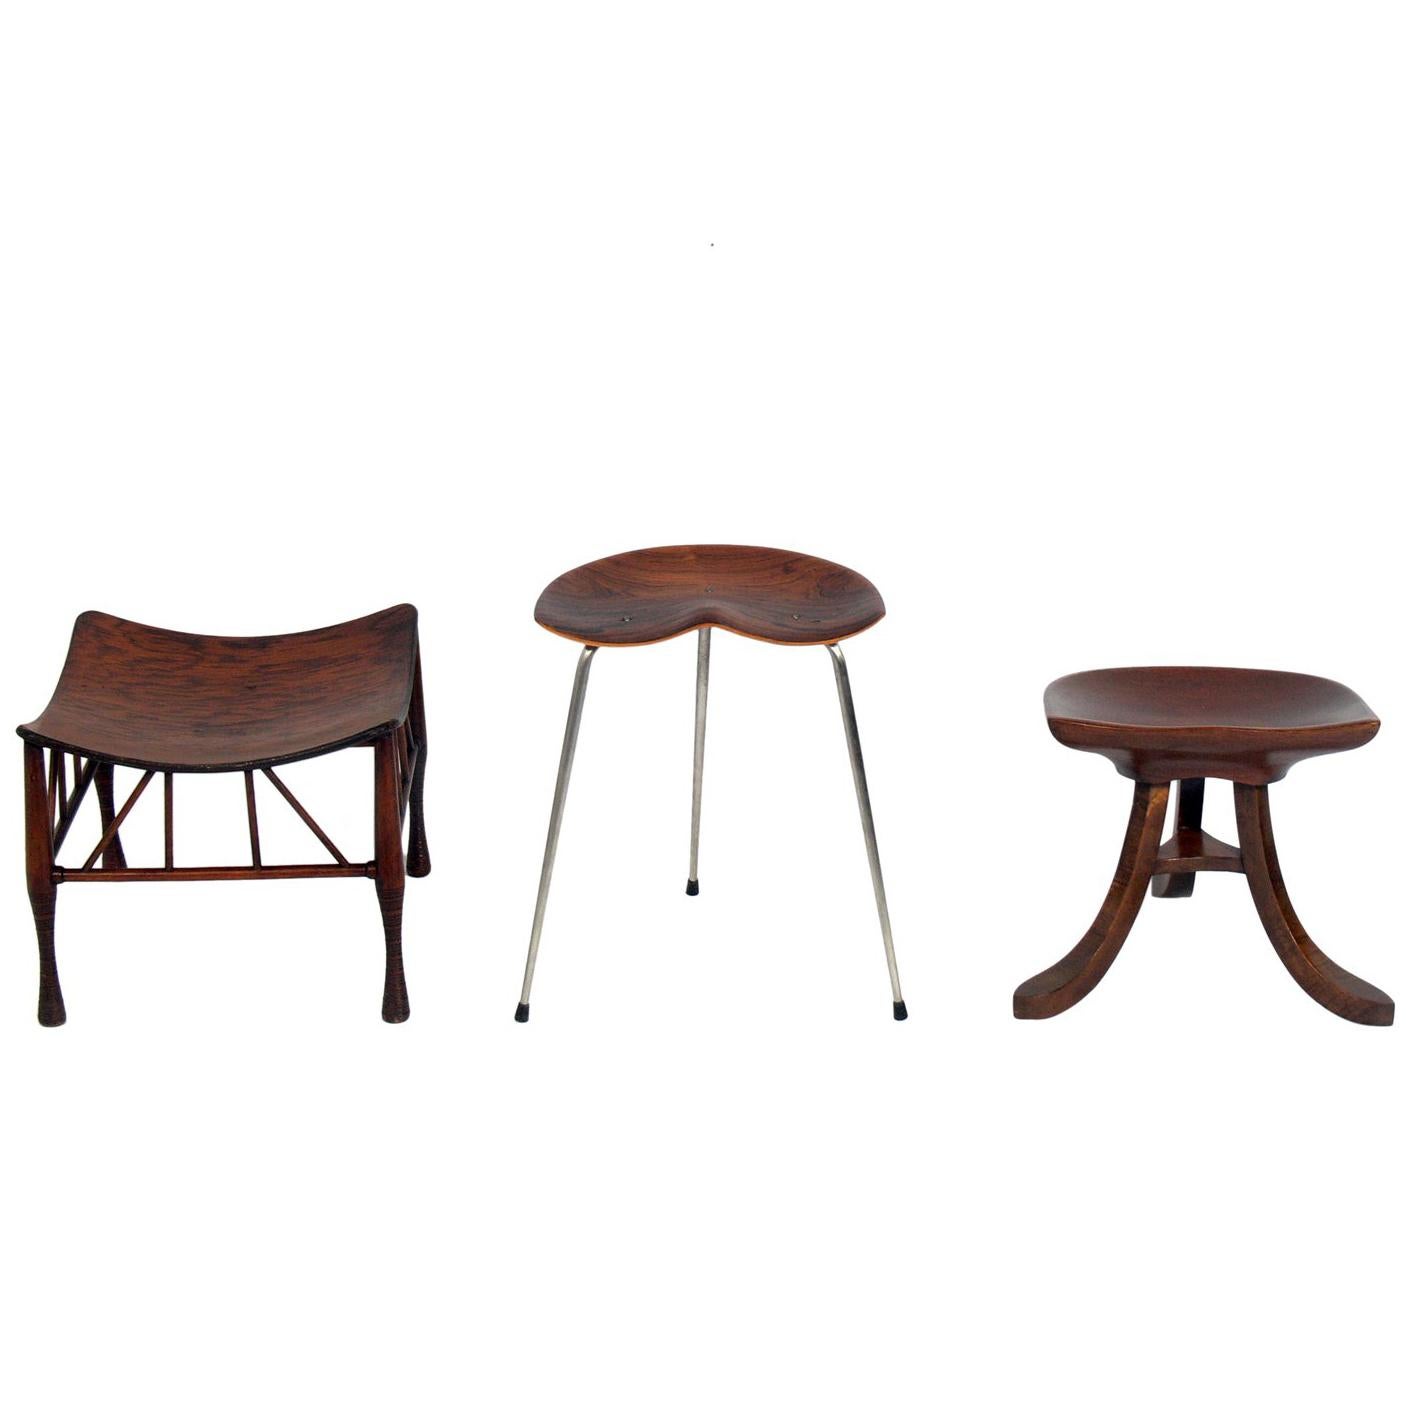 Selection of Sculptural Stools